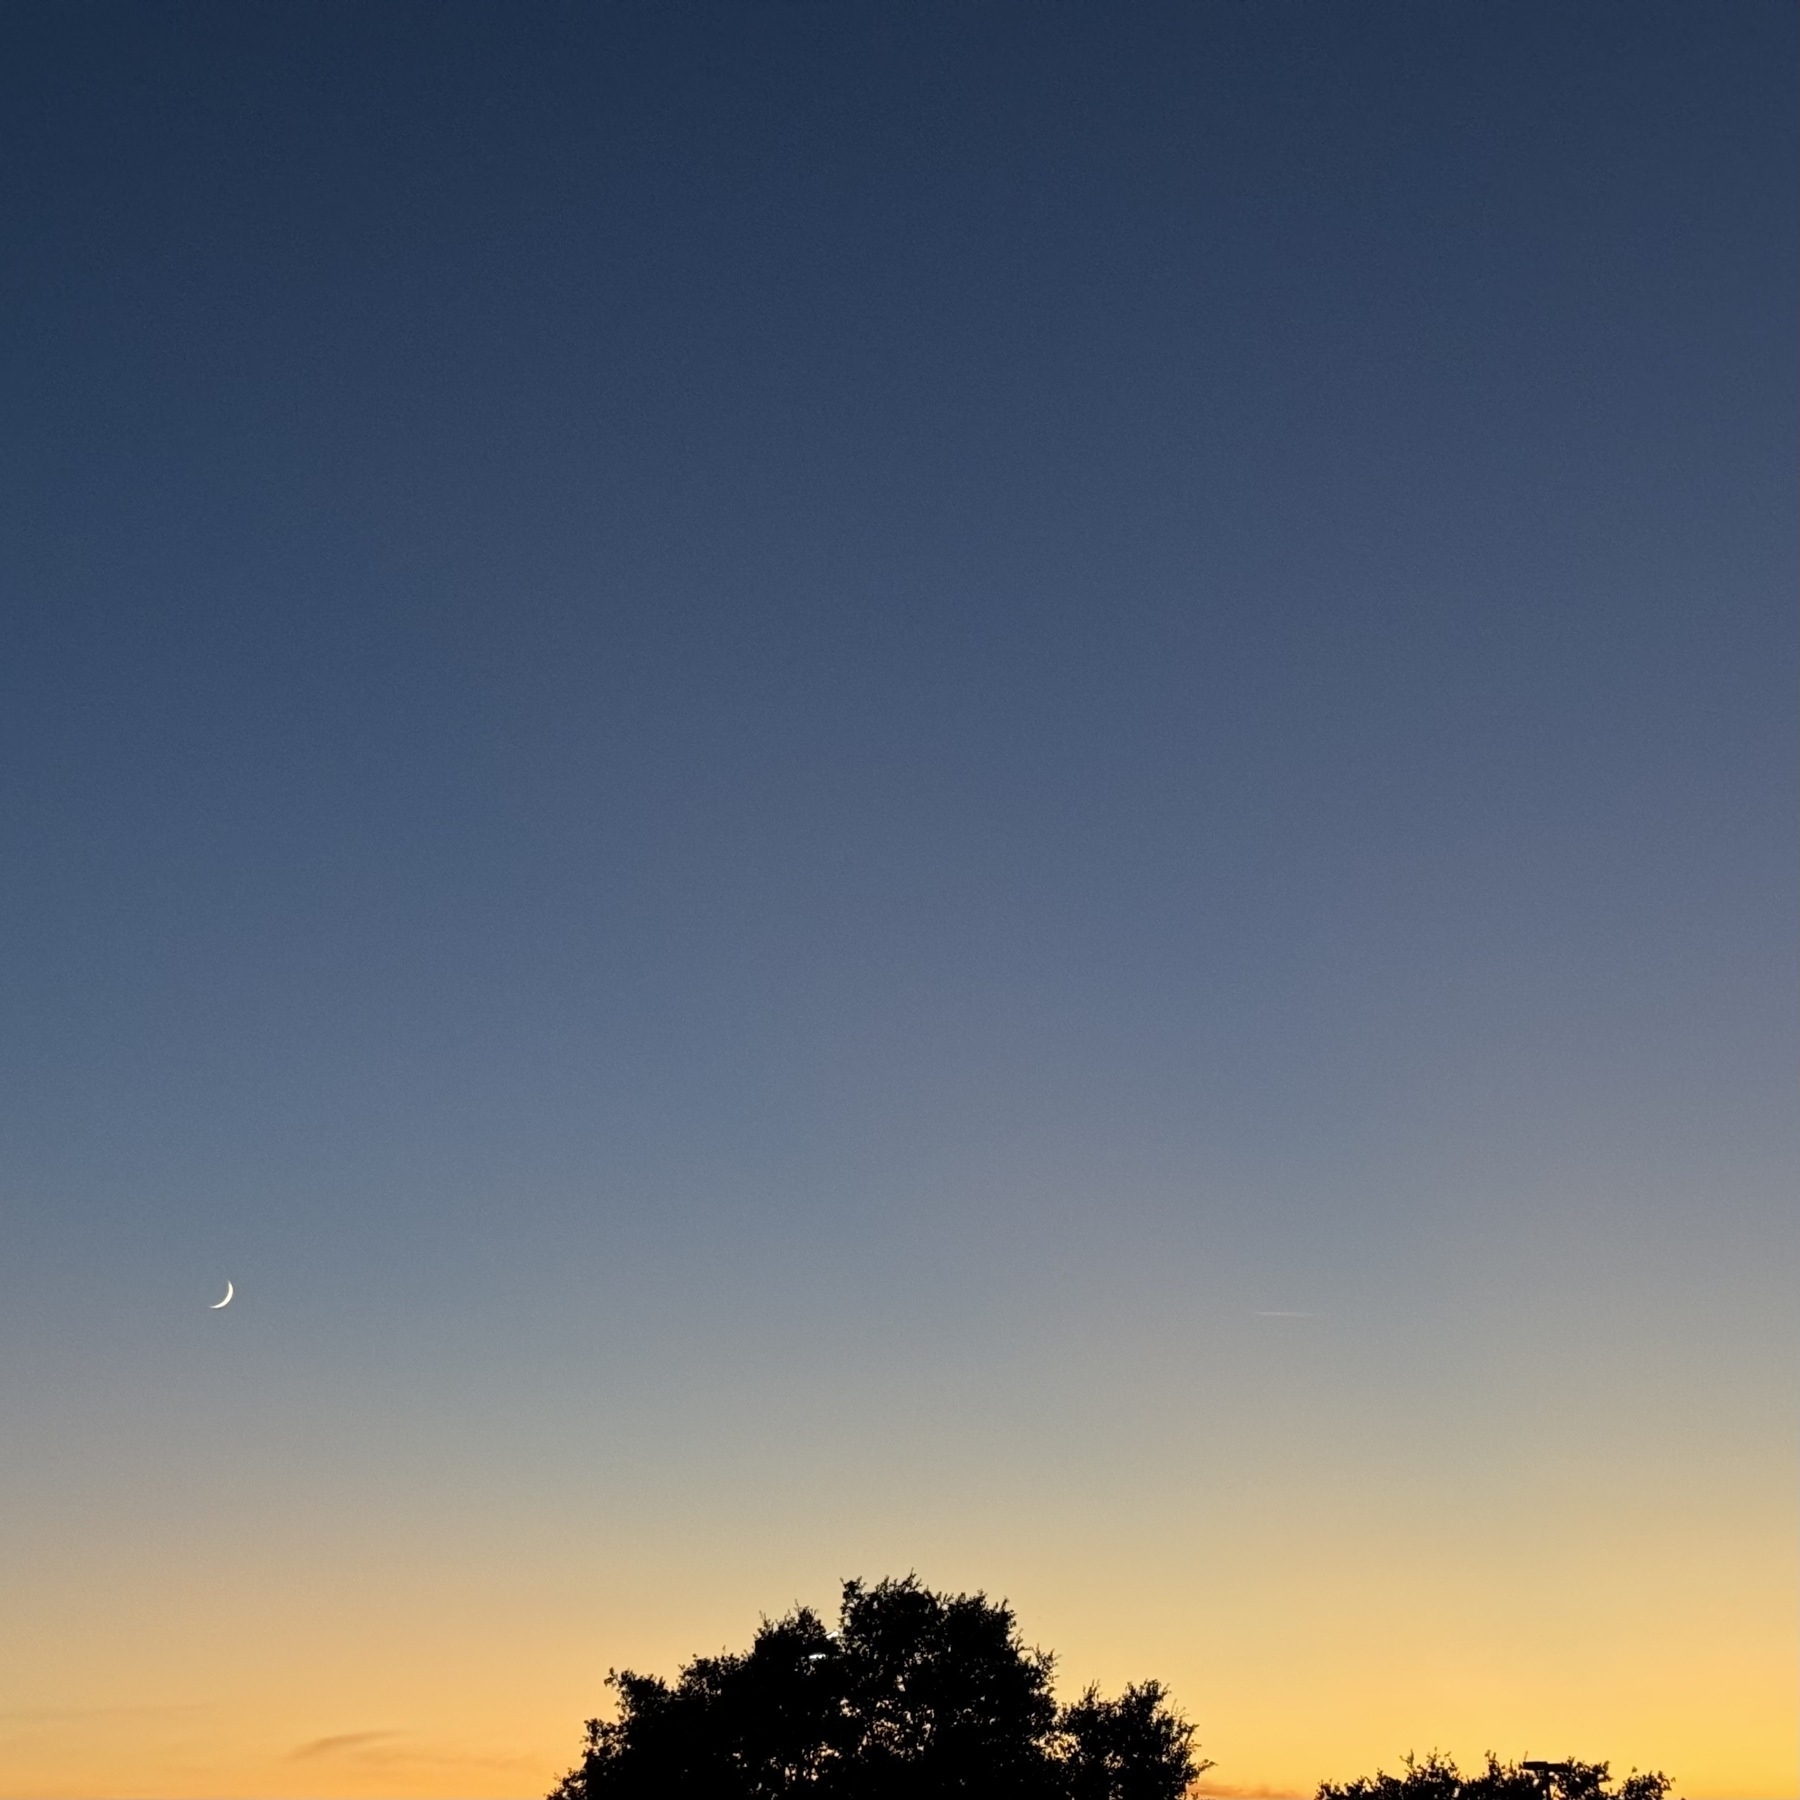 Sunset gradient with the moon